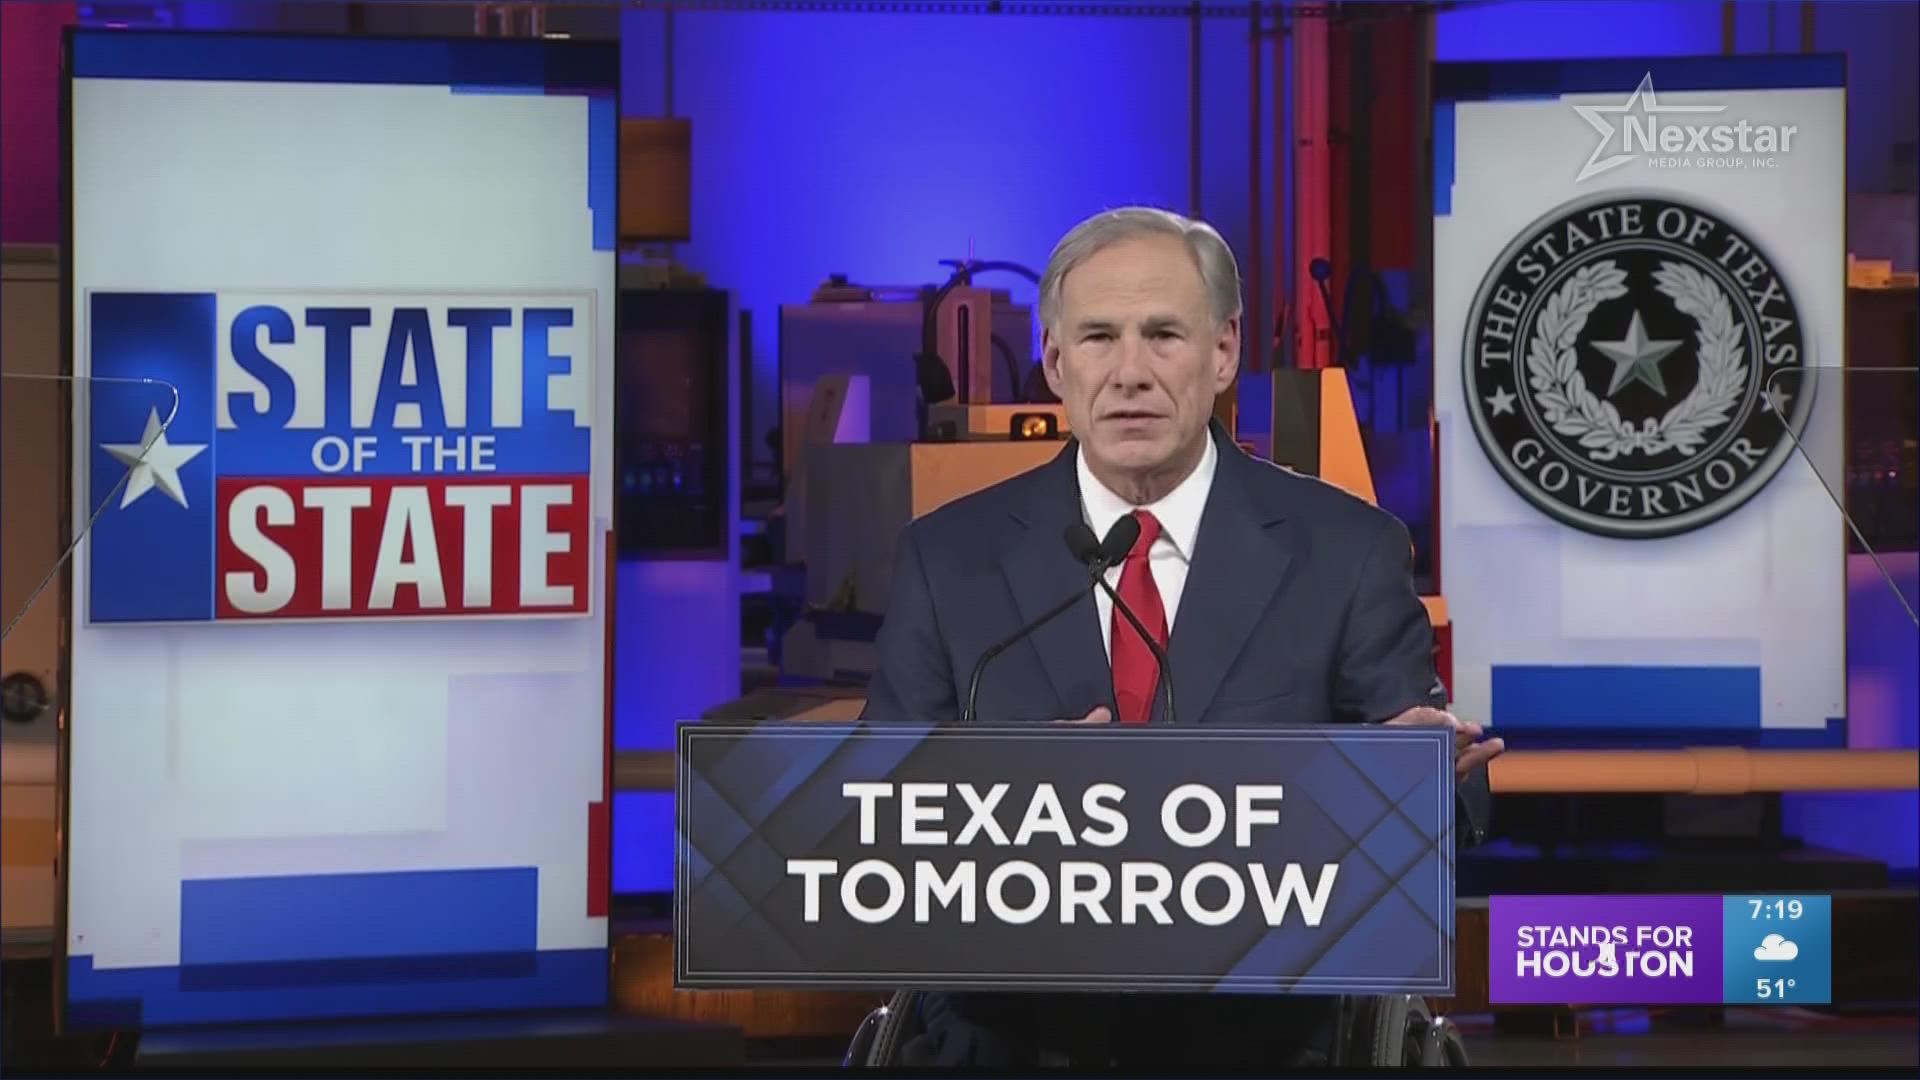 Gov. Greg Abbott spoke on the border crisis during his State of the State address.